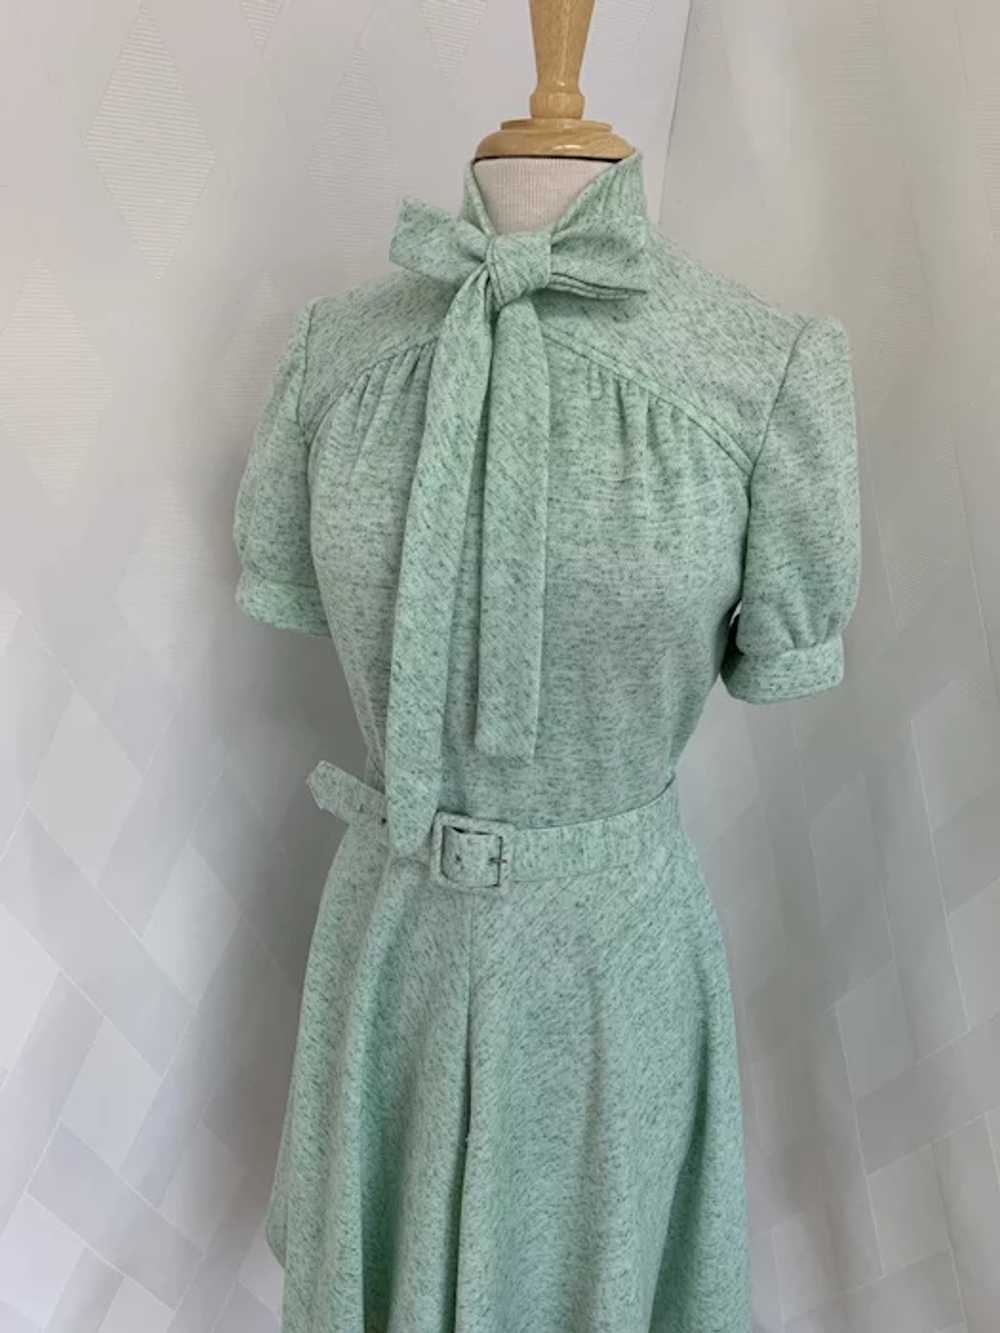 Knit 1970s Pussy Bow Dress with Full Skirt - image 2